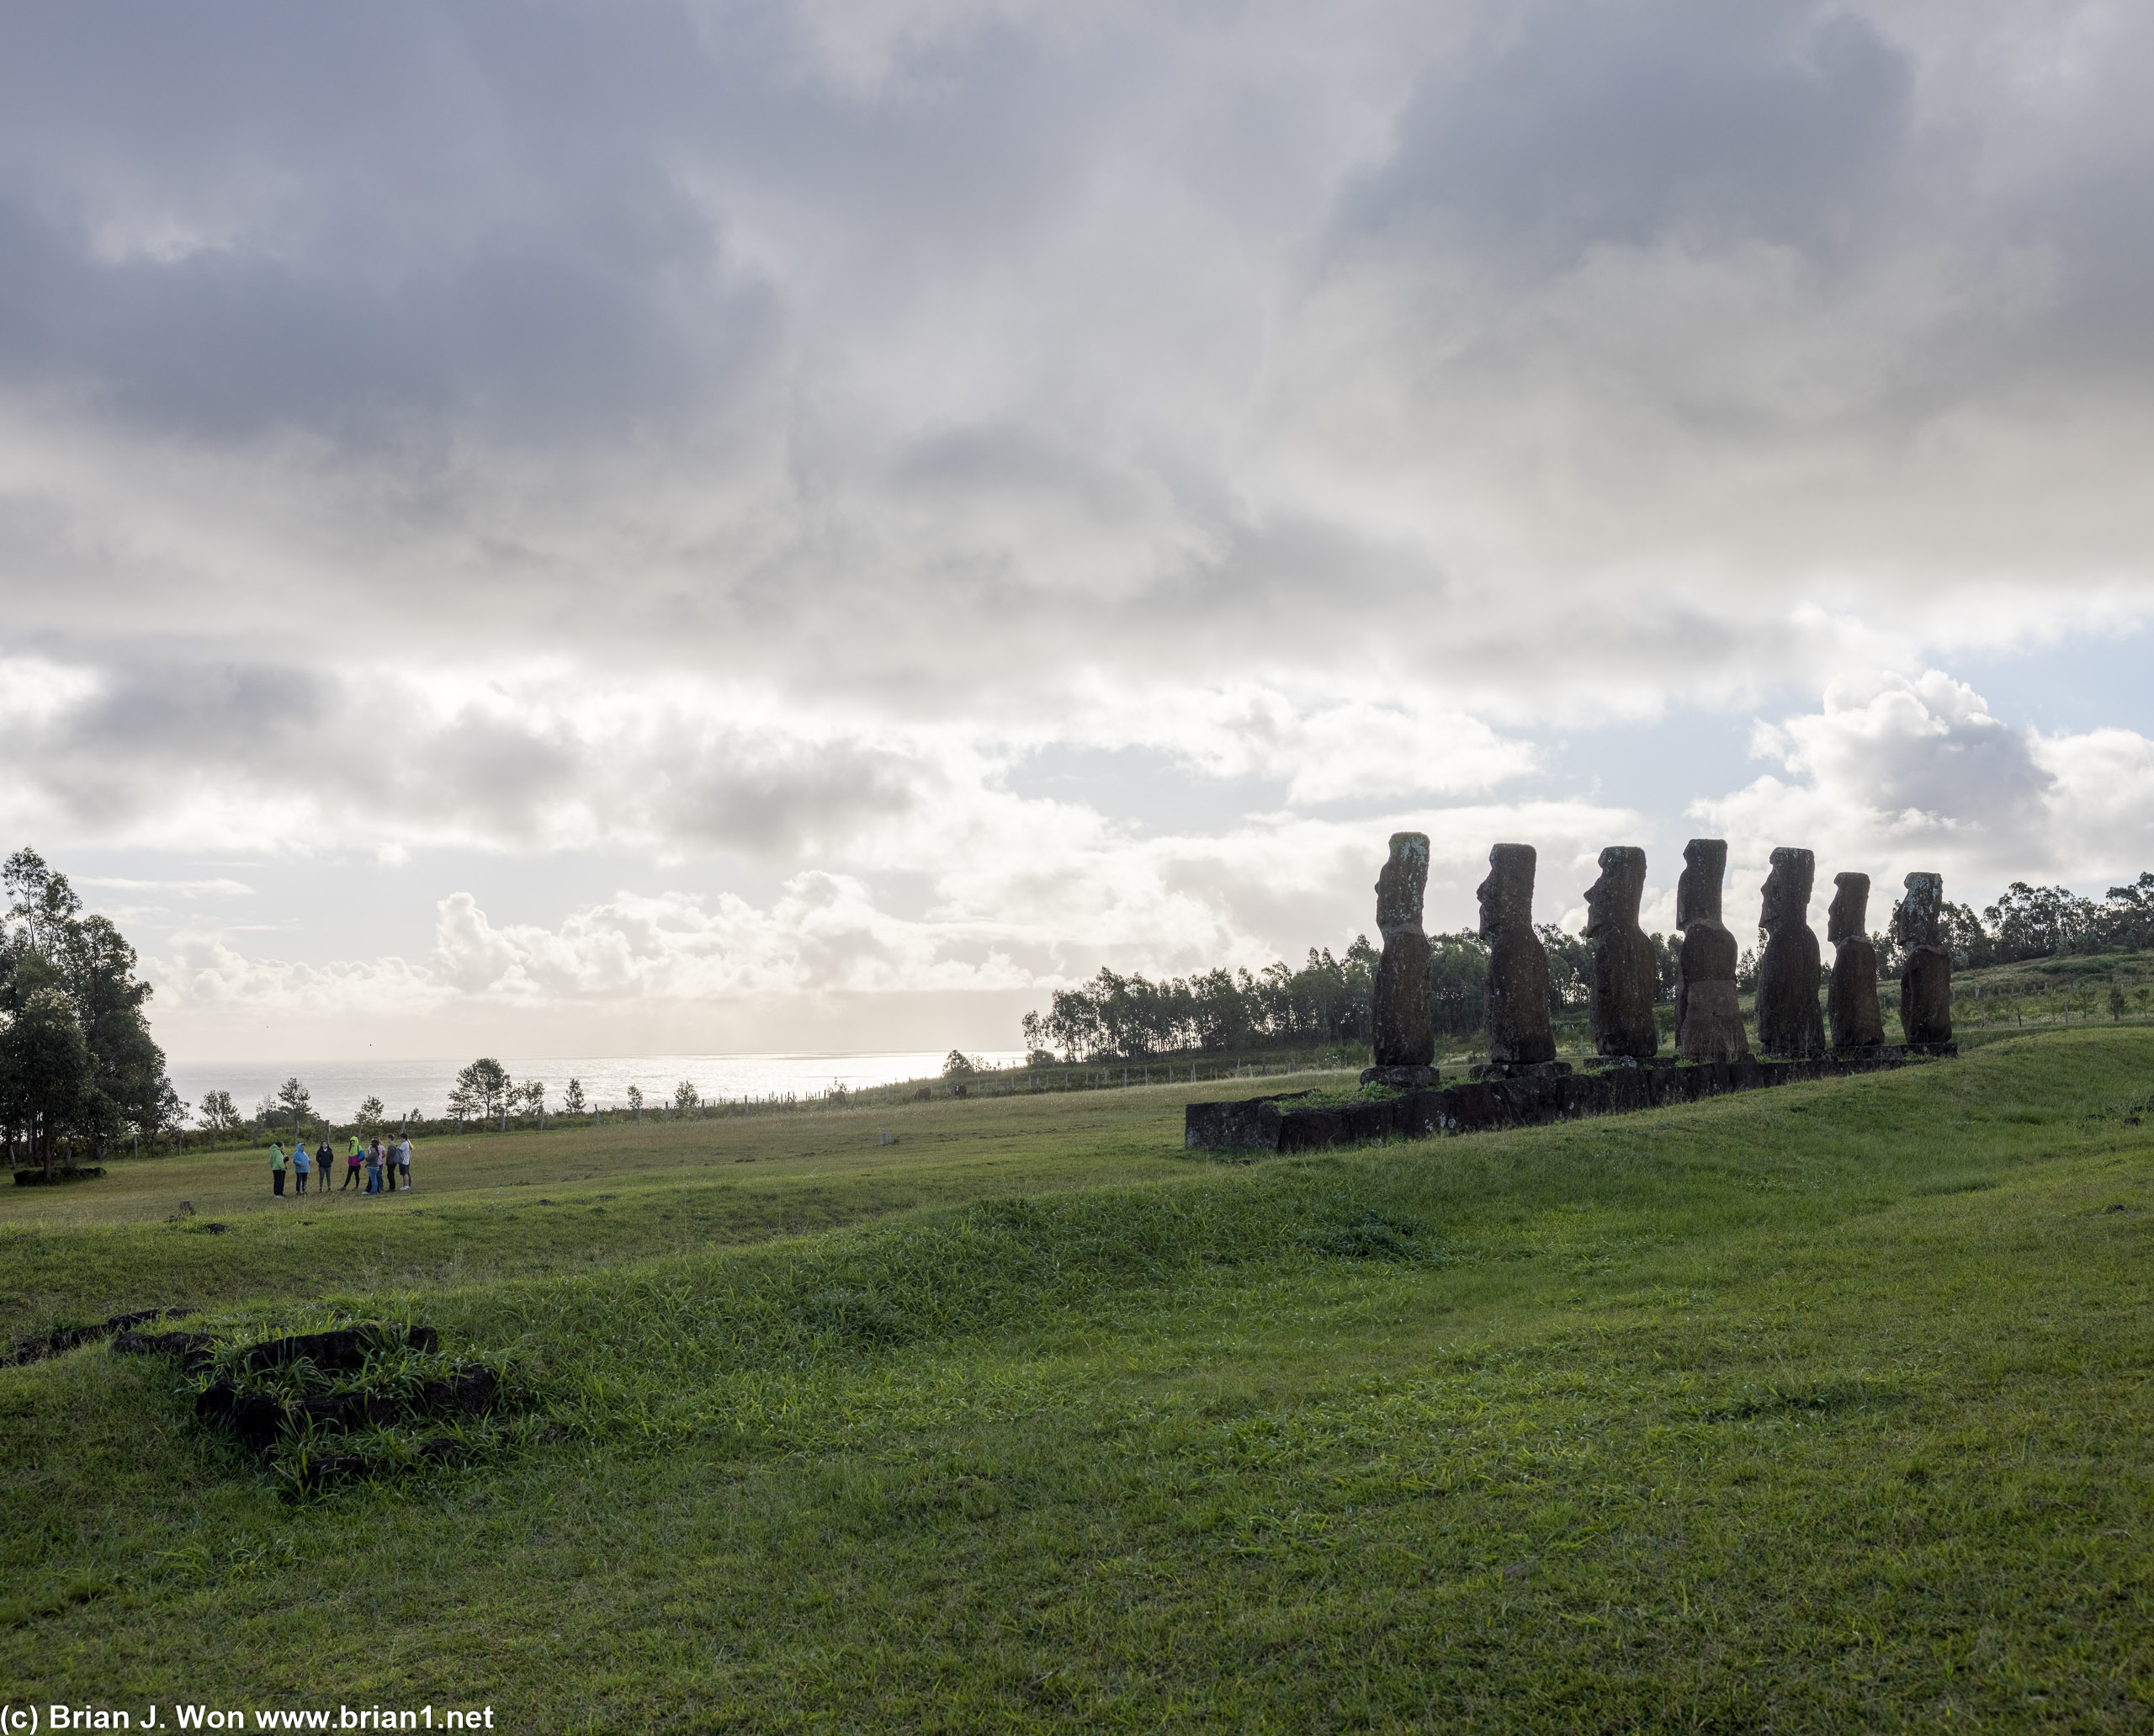 Uniquely among moai, these face not only the ocean, but are aligned to the spring equinox/autumn equinox.